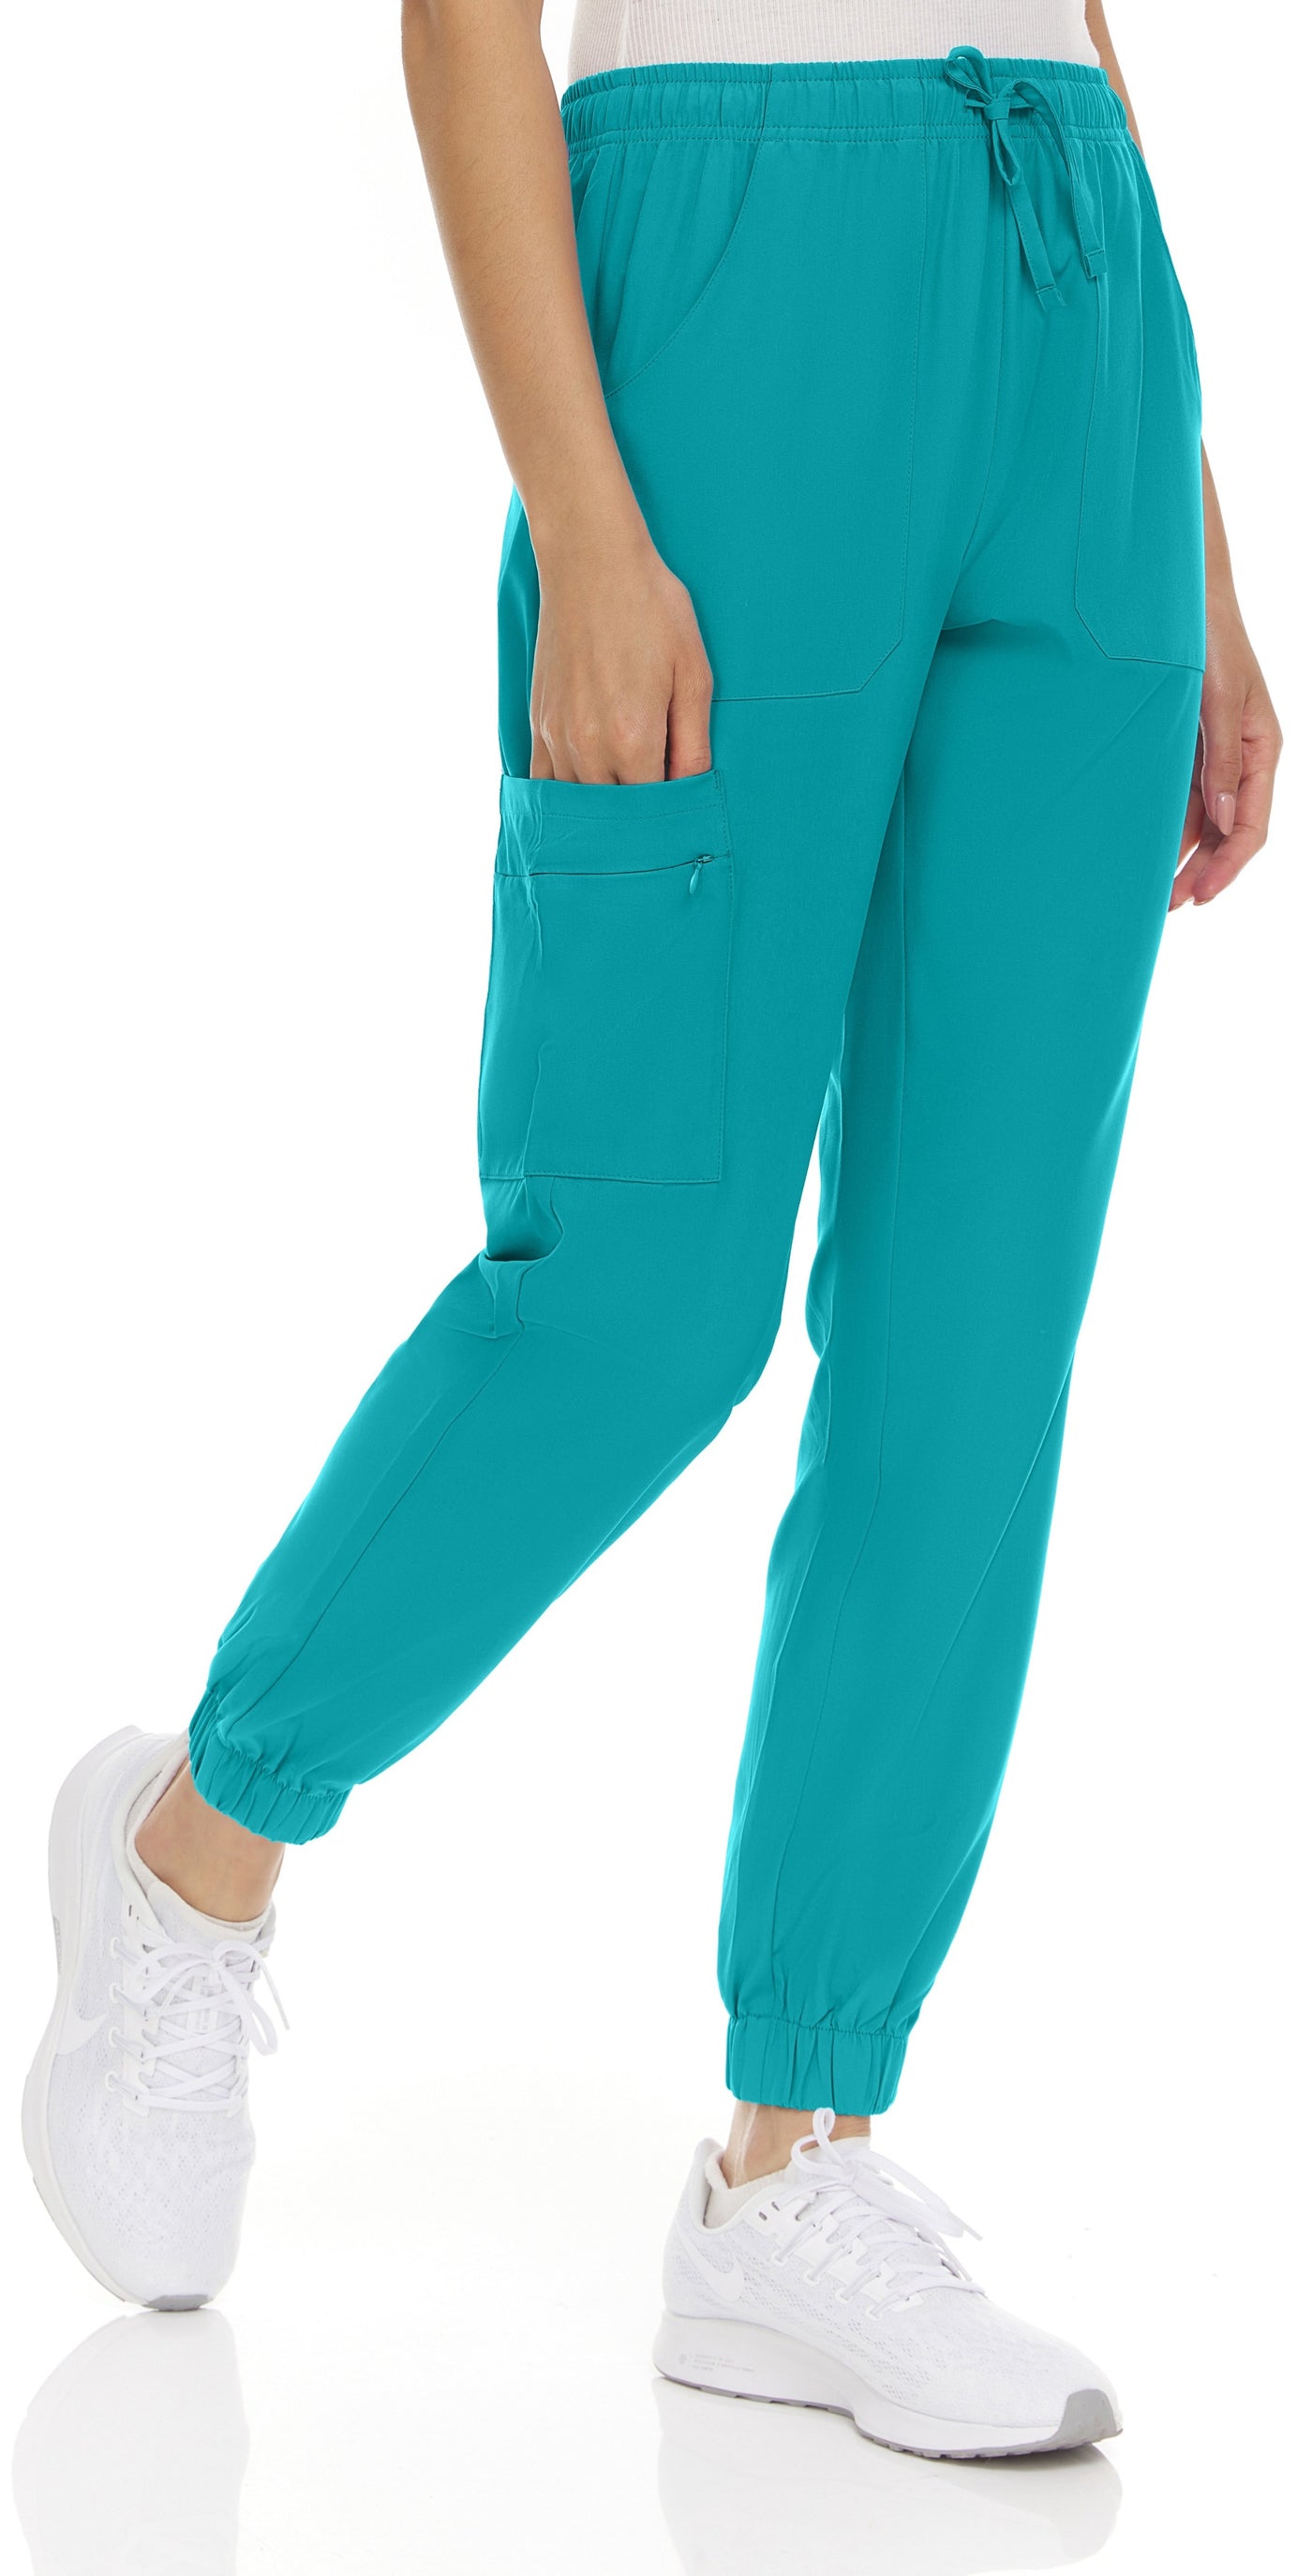 Luna - Aqua Water Resistant Tapered Jogger Pant By MediChic XXS-3X / Teal